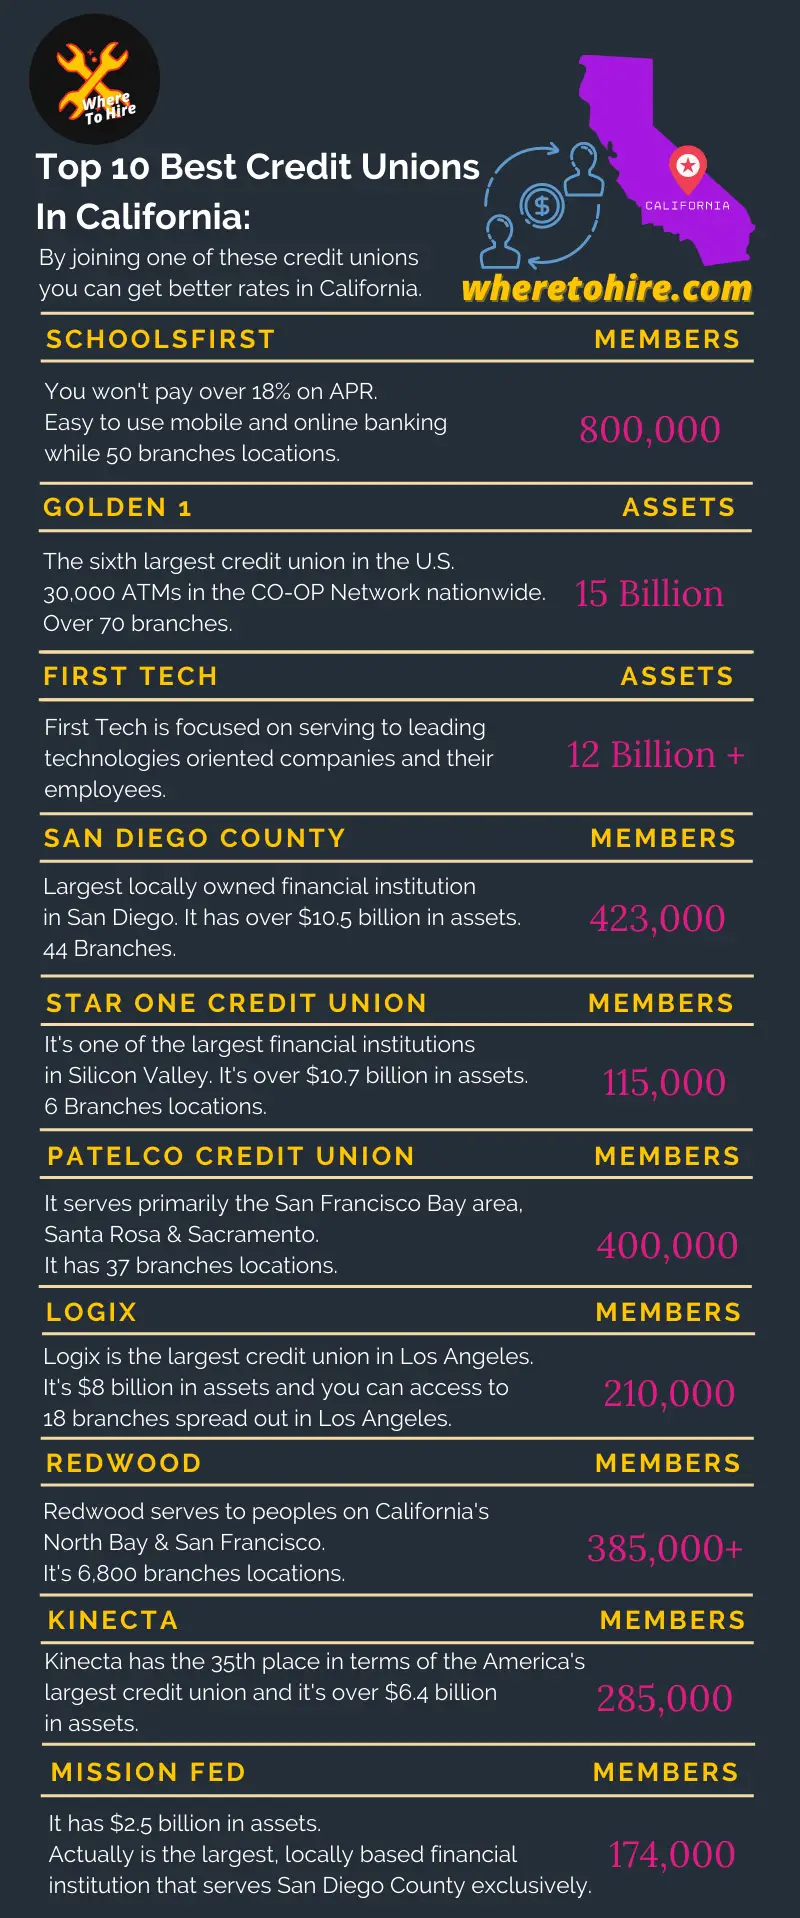 What Are The Best Credit Unions In California?